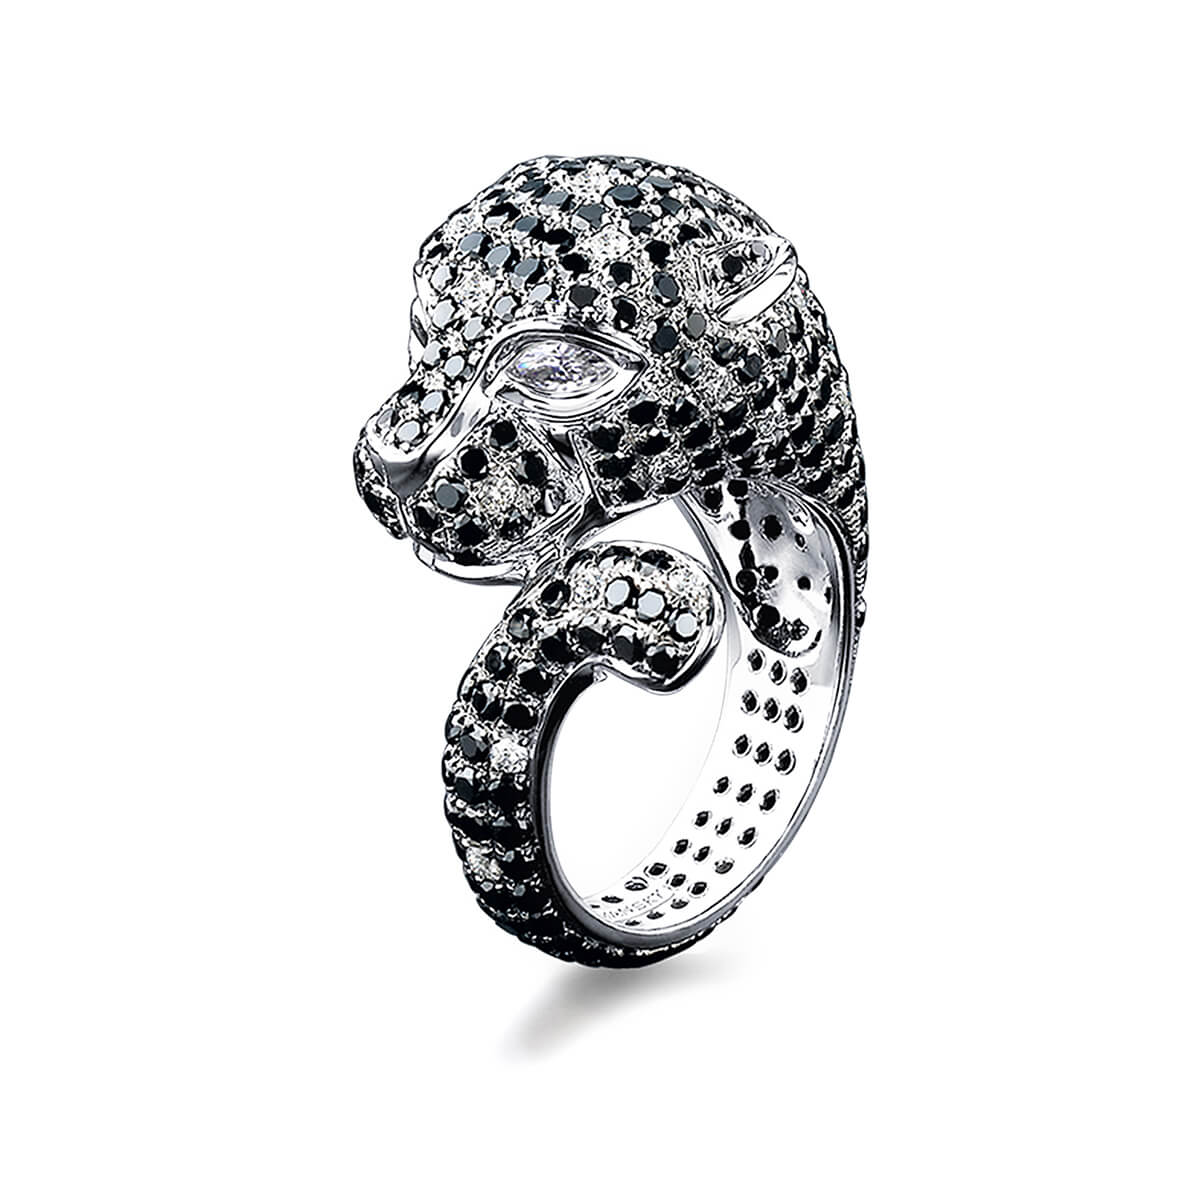 Black and White Diamond Panther Ring In 18K White Gold Profile View